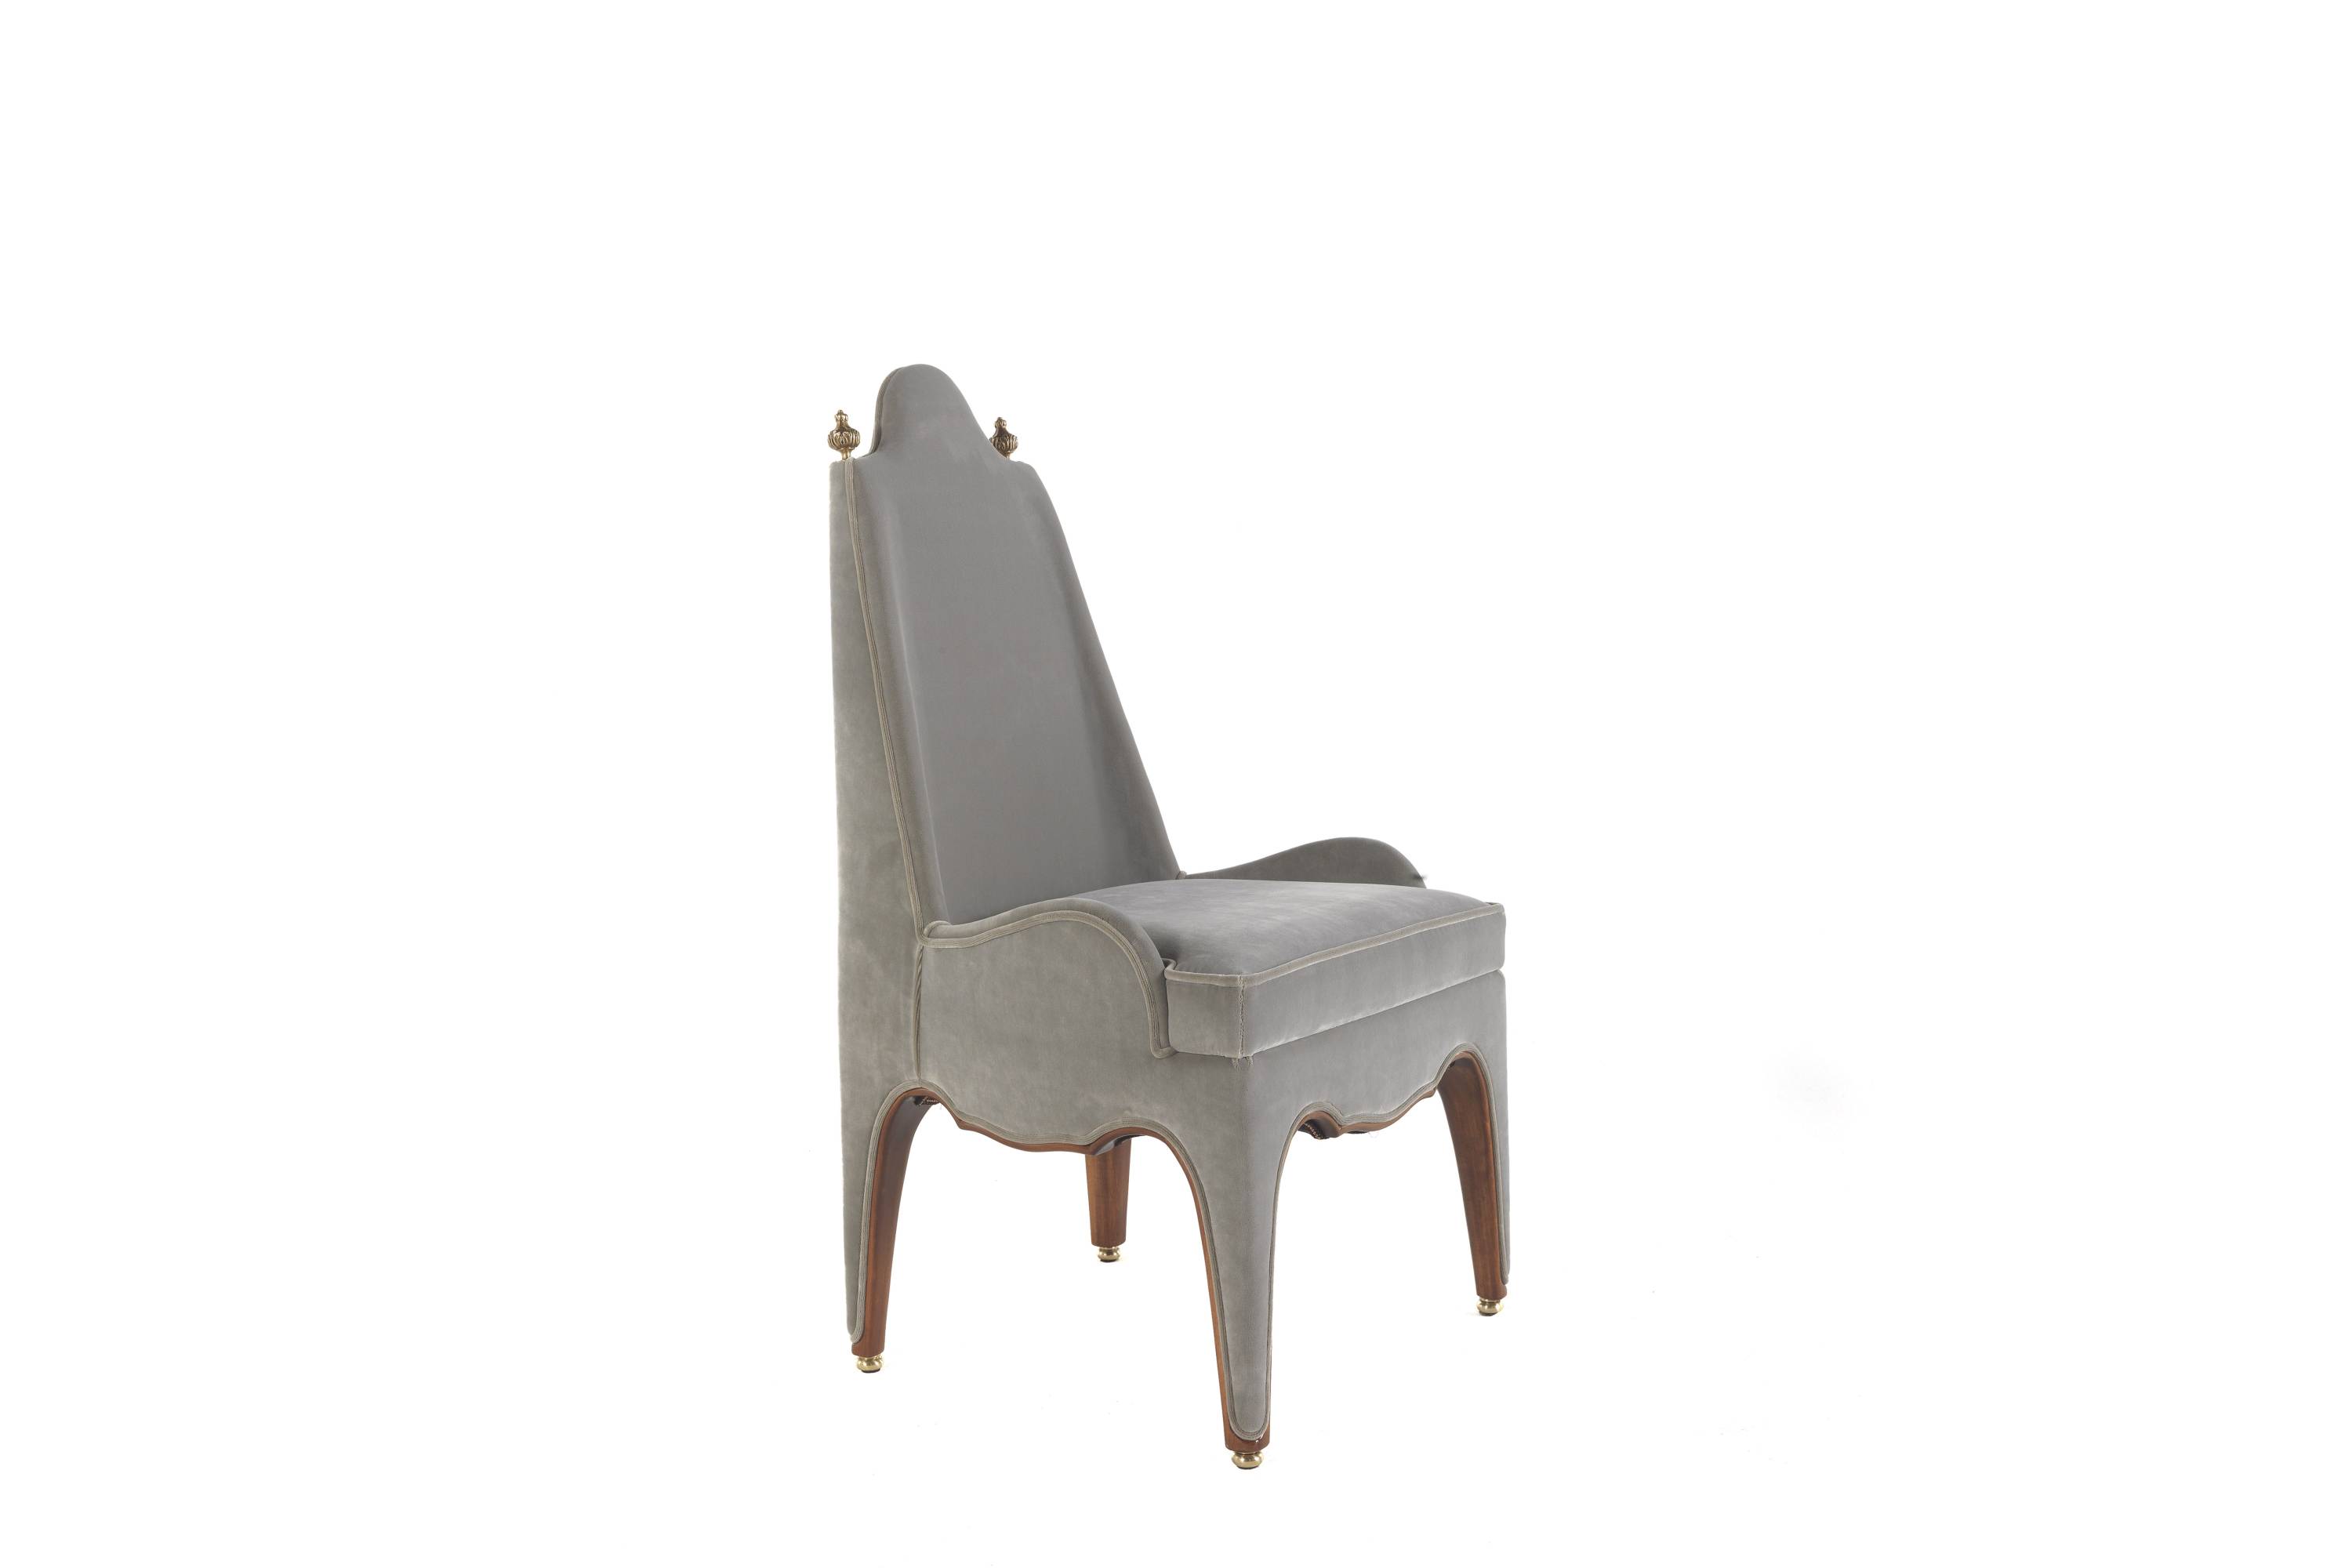 ETOILE chair - chair with armrests – Jumbo Collection Italian luxury classic chairs. tailor-made interior design projects to meet all your furnishing needs